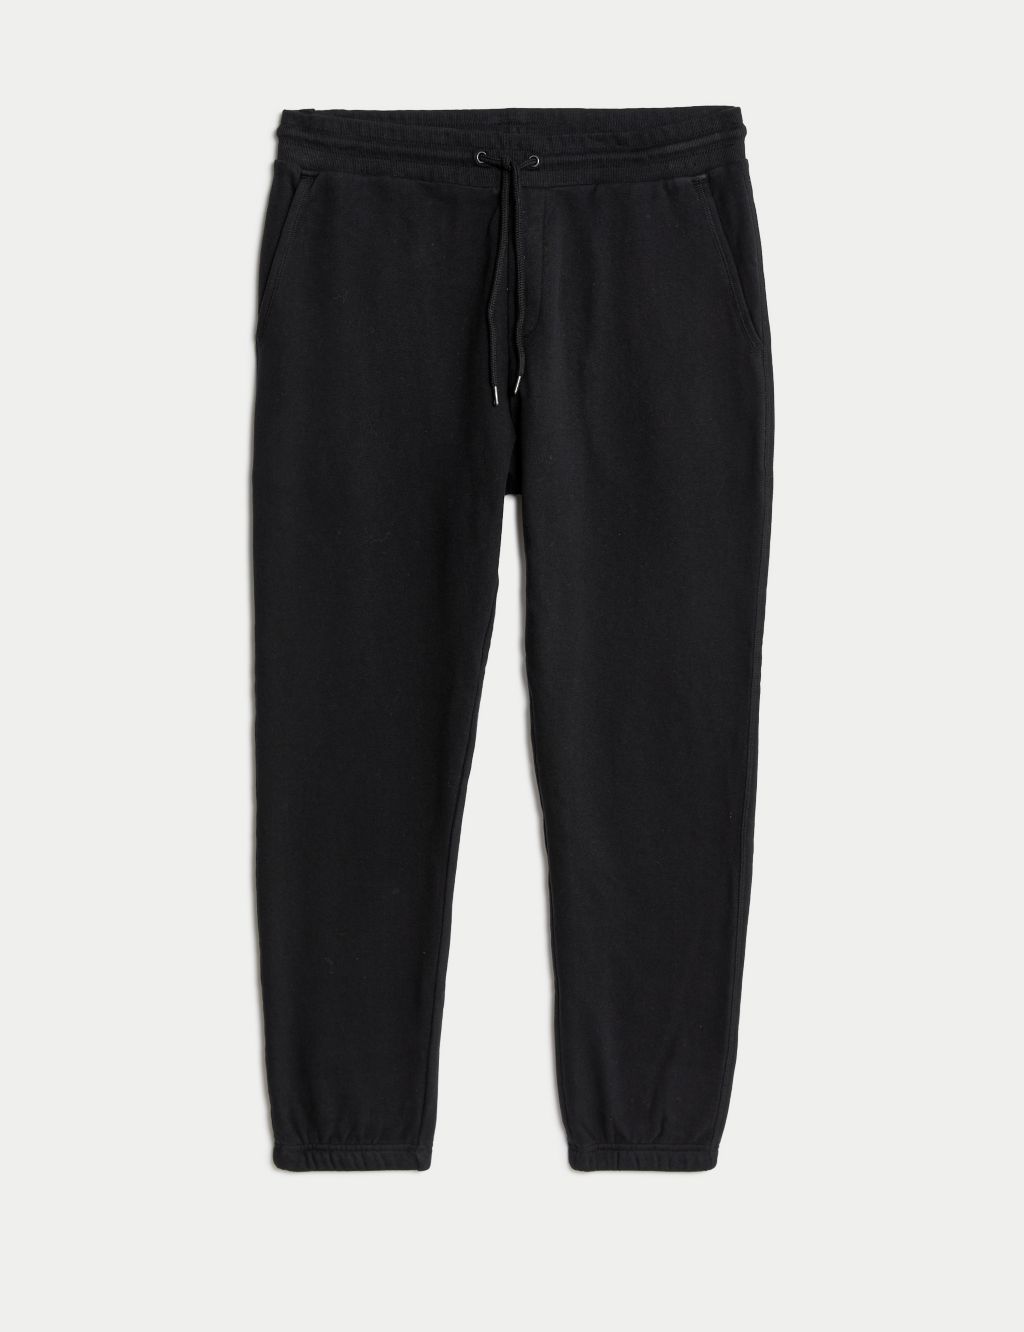 Drawstring Pure Cotton Fleece Lined Joggers image 2